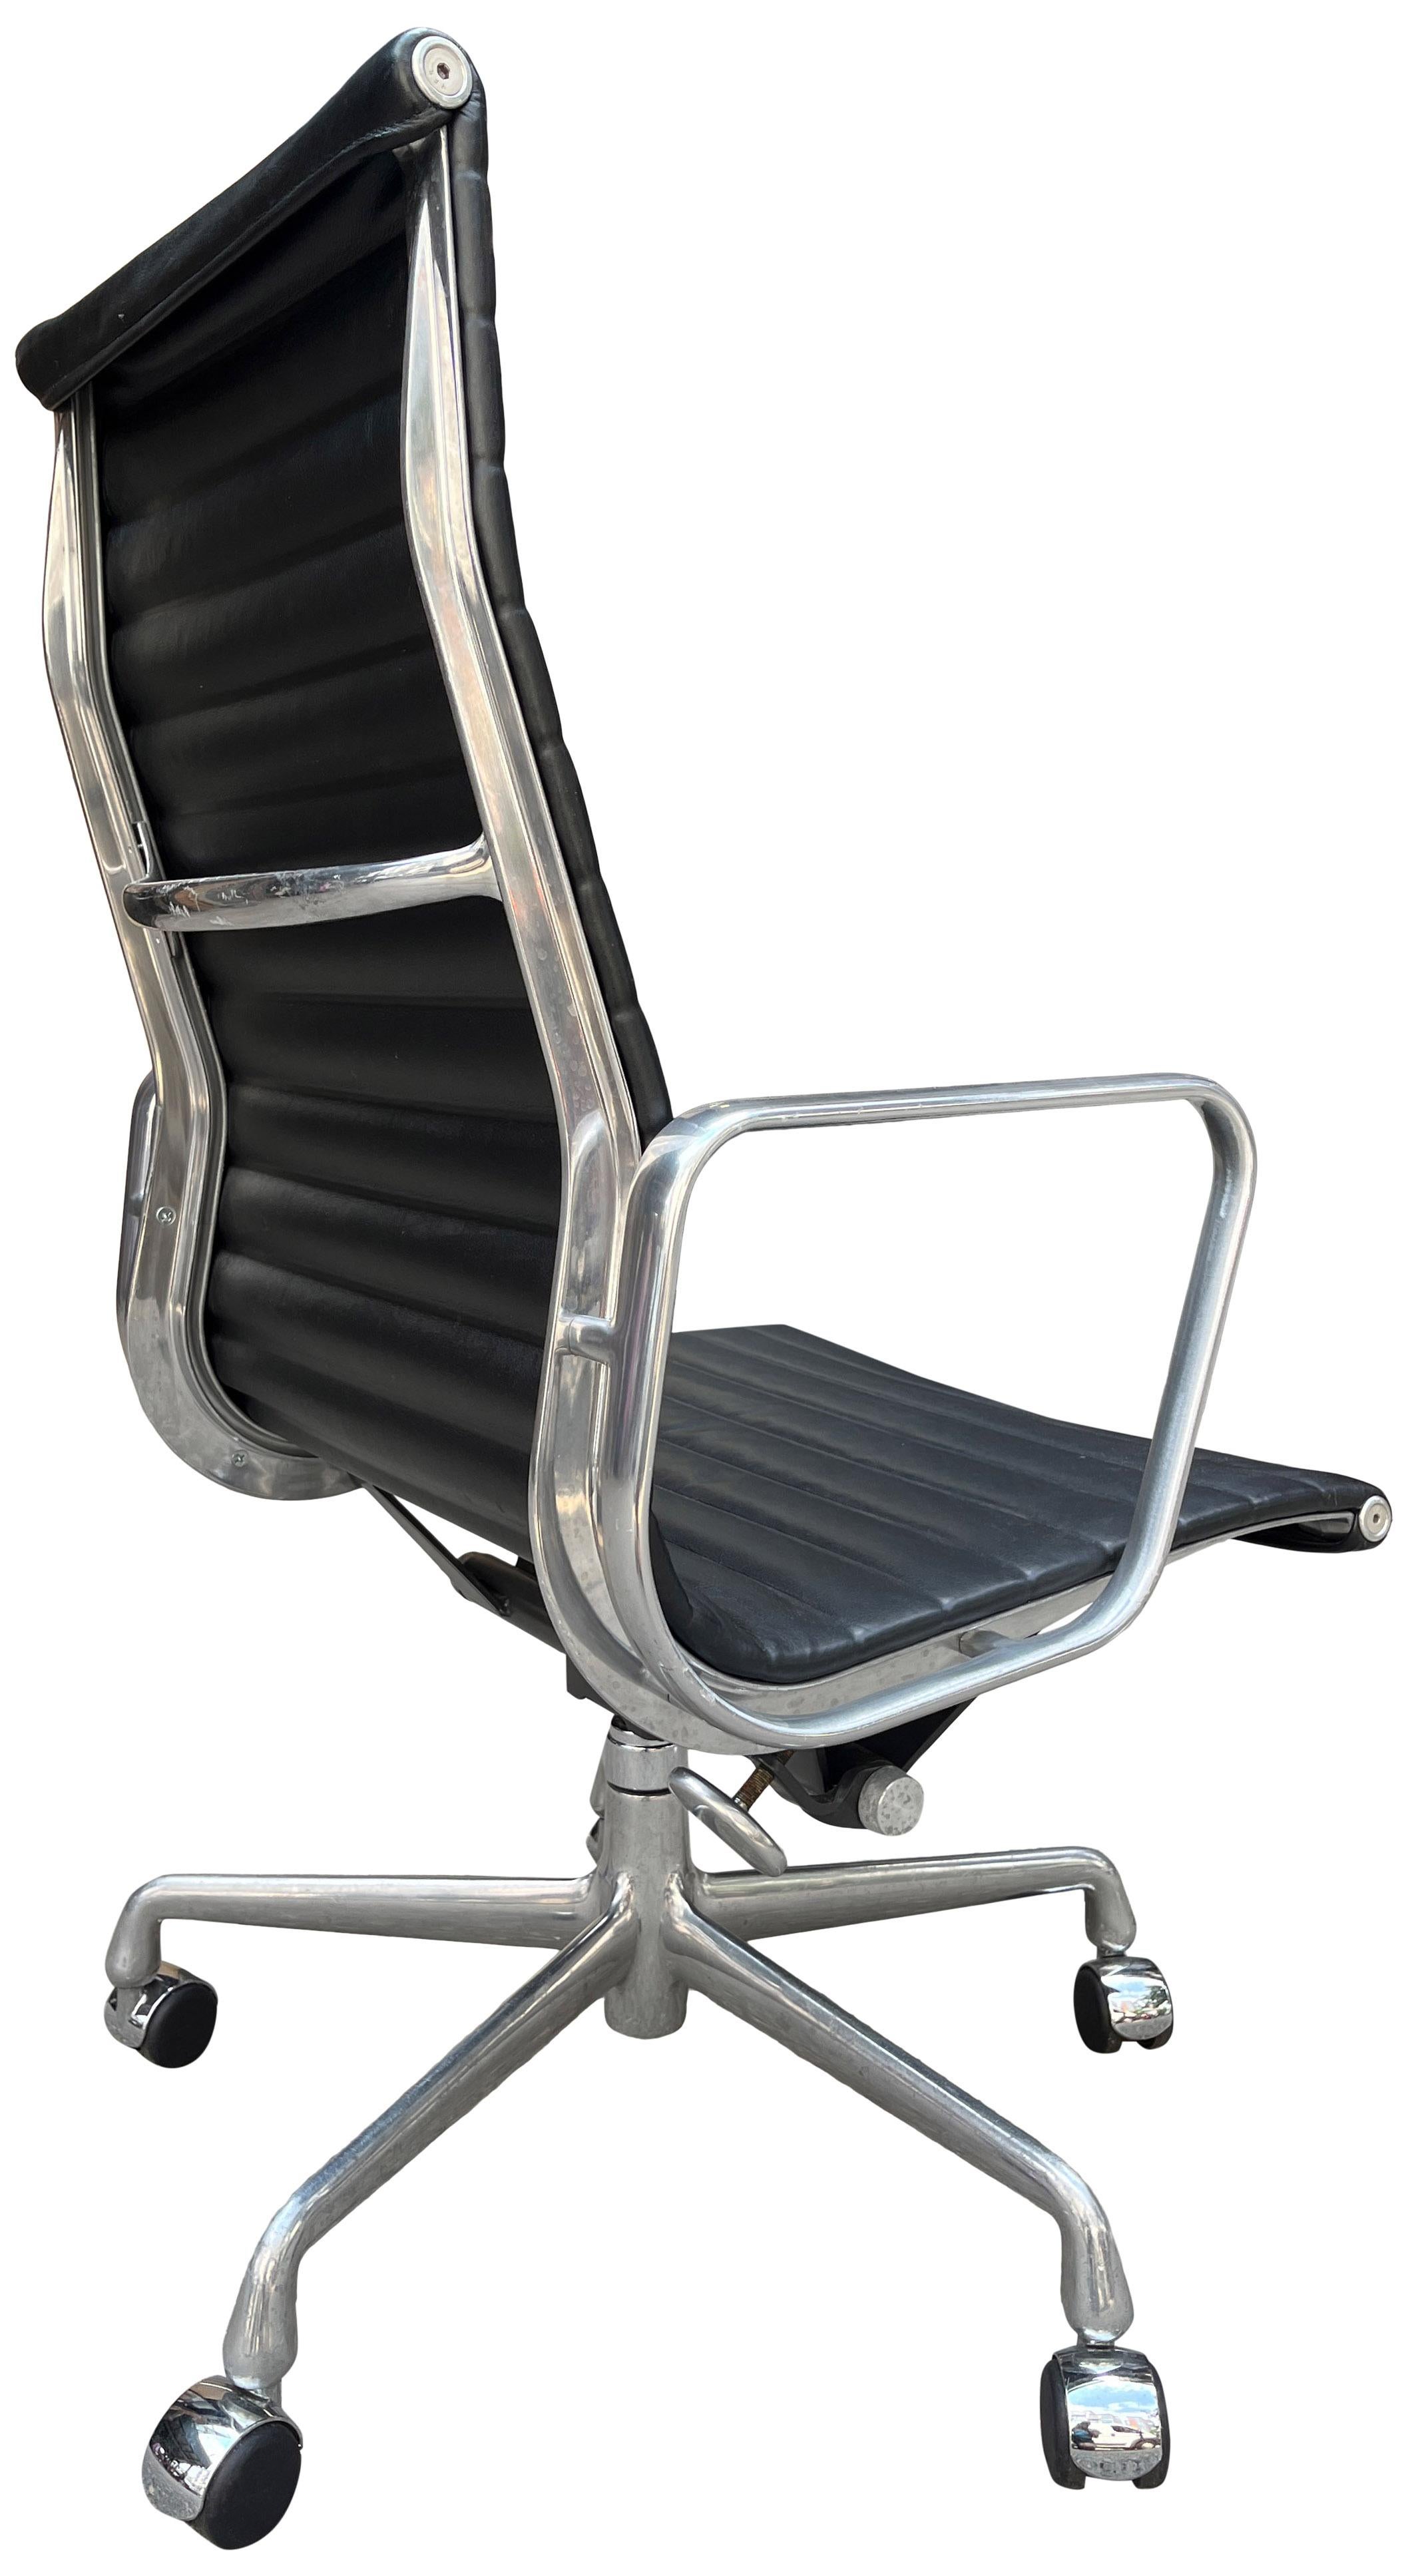 

Eames for Herman Miller Aluminum Group chairs in premium plush black leather with high-backs. 
An icon of Mid Century Modern design that continues to be produced today. Manual height and tilt. 50th anniversary addition premium black leather that